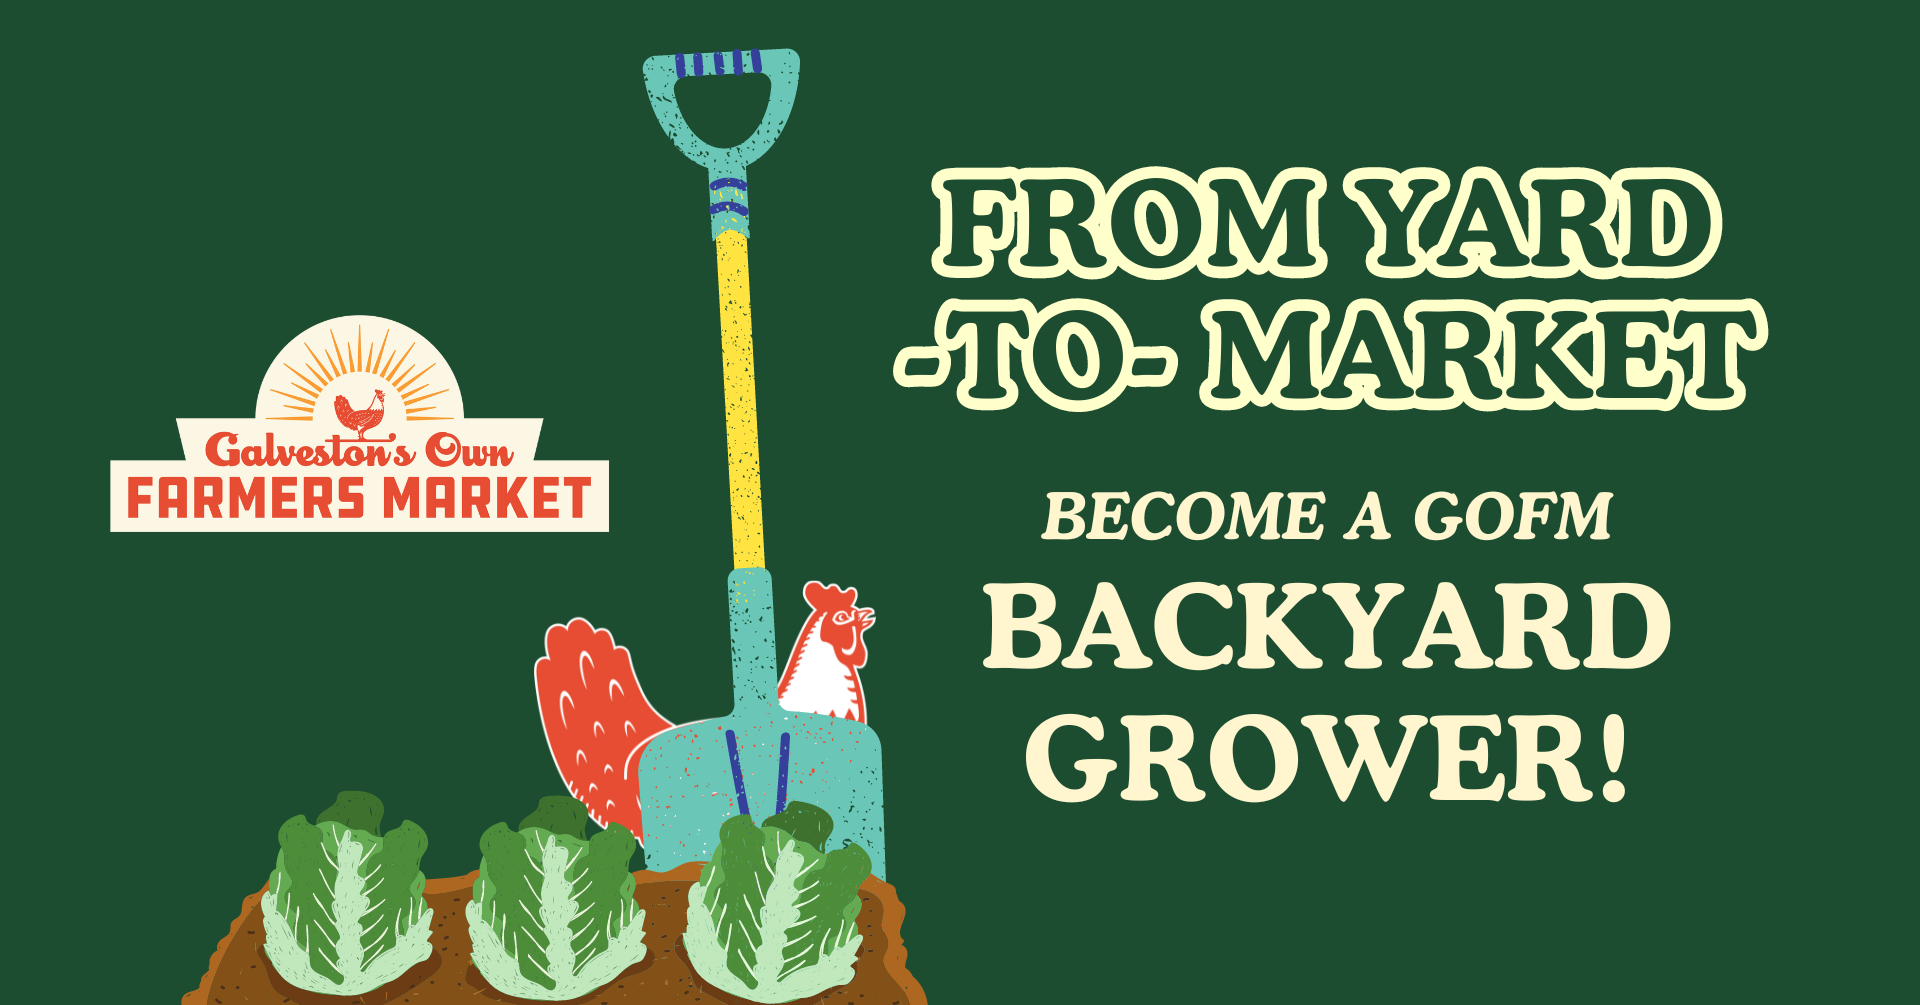 From yard to market! Become a GOFM Backyard Grower